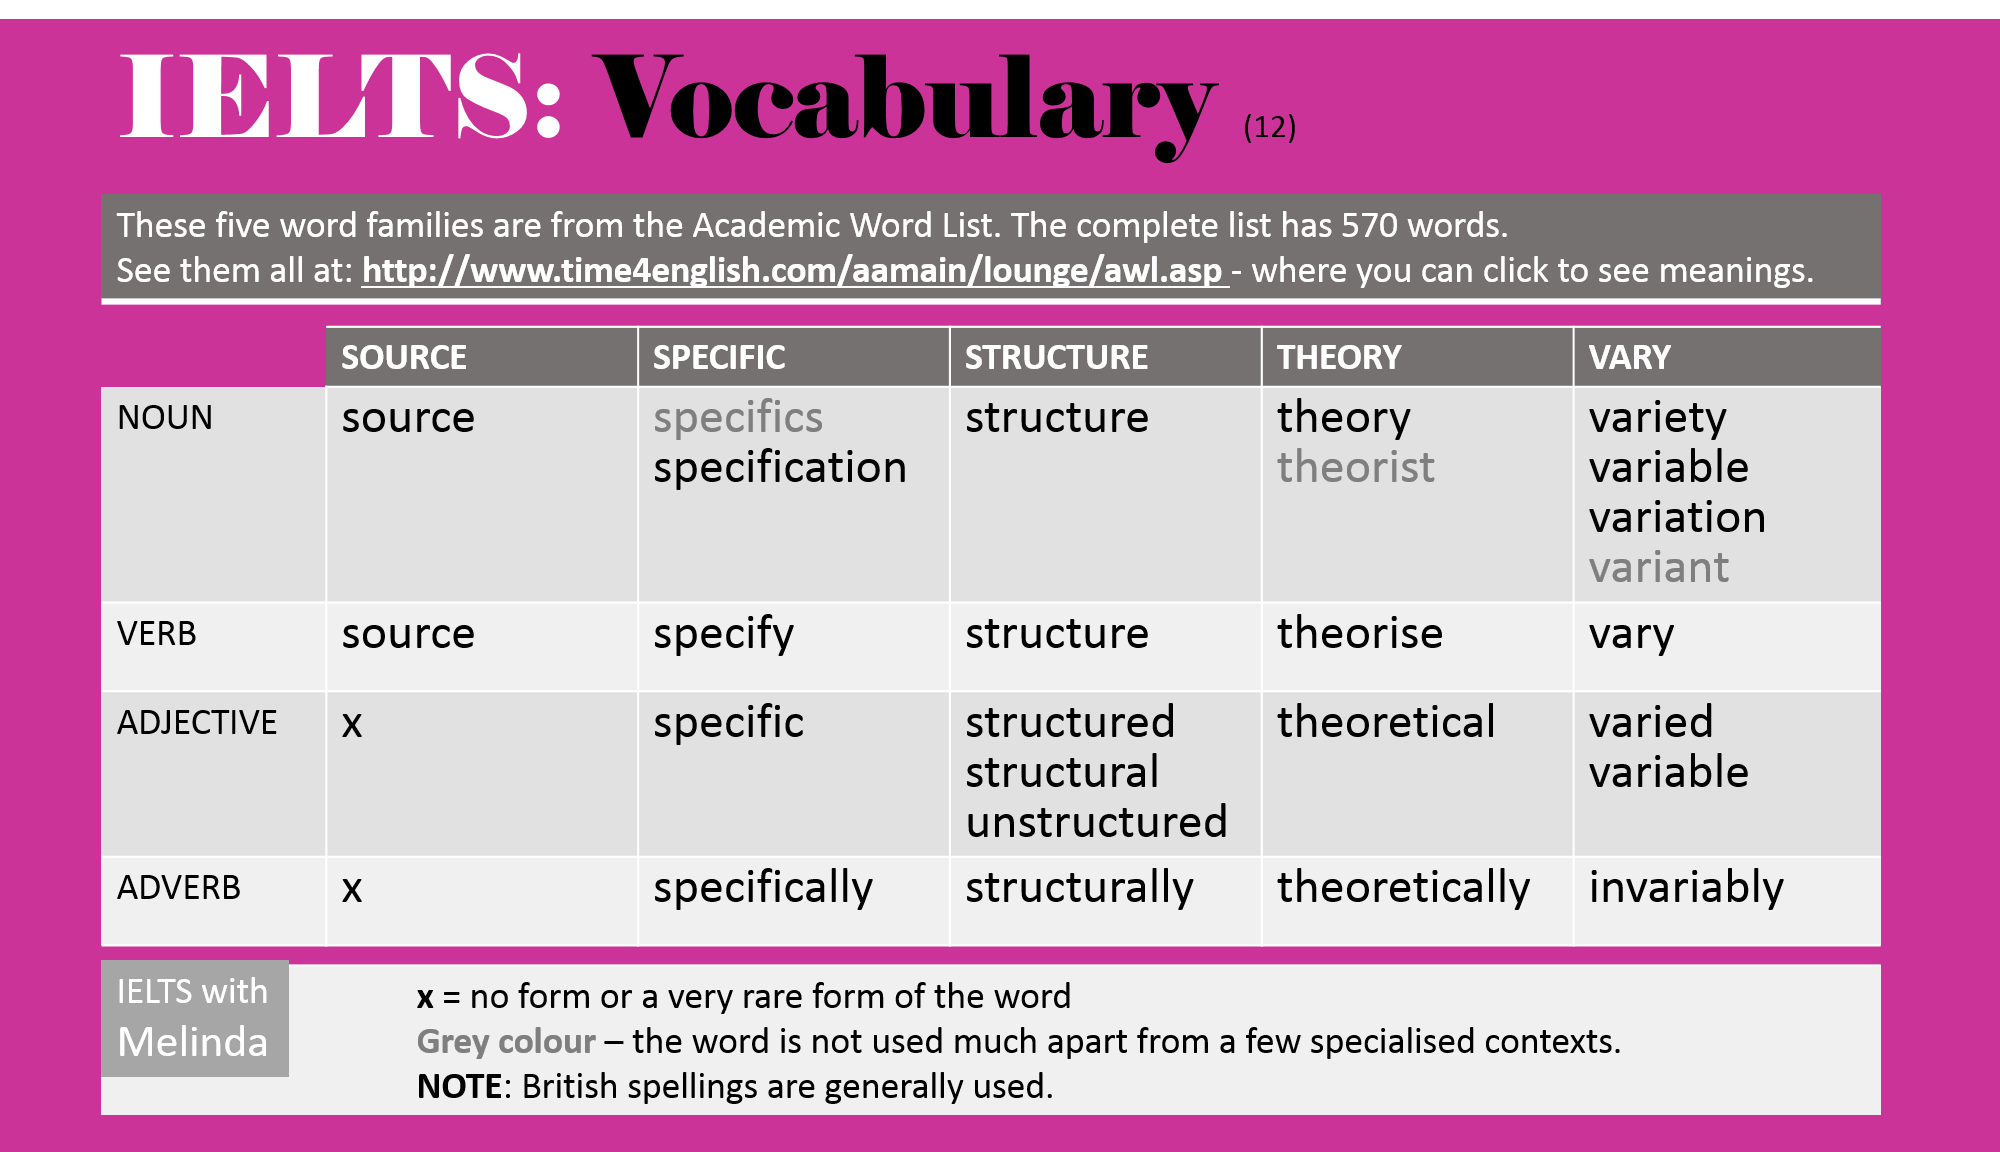 Condition variable. Academic Words for IELTS writing. IELTS Academic Vocabulary. IELTS Academic Words. IELTS Vocabulary Words.